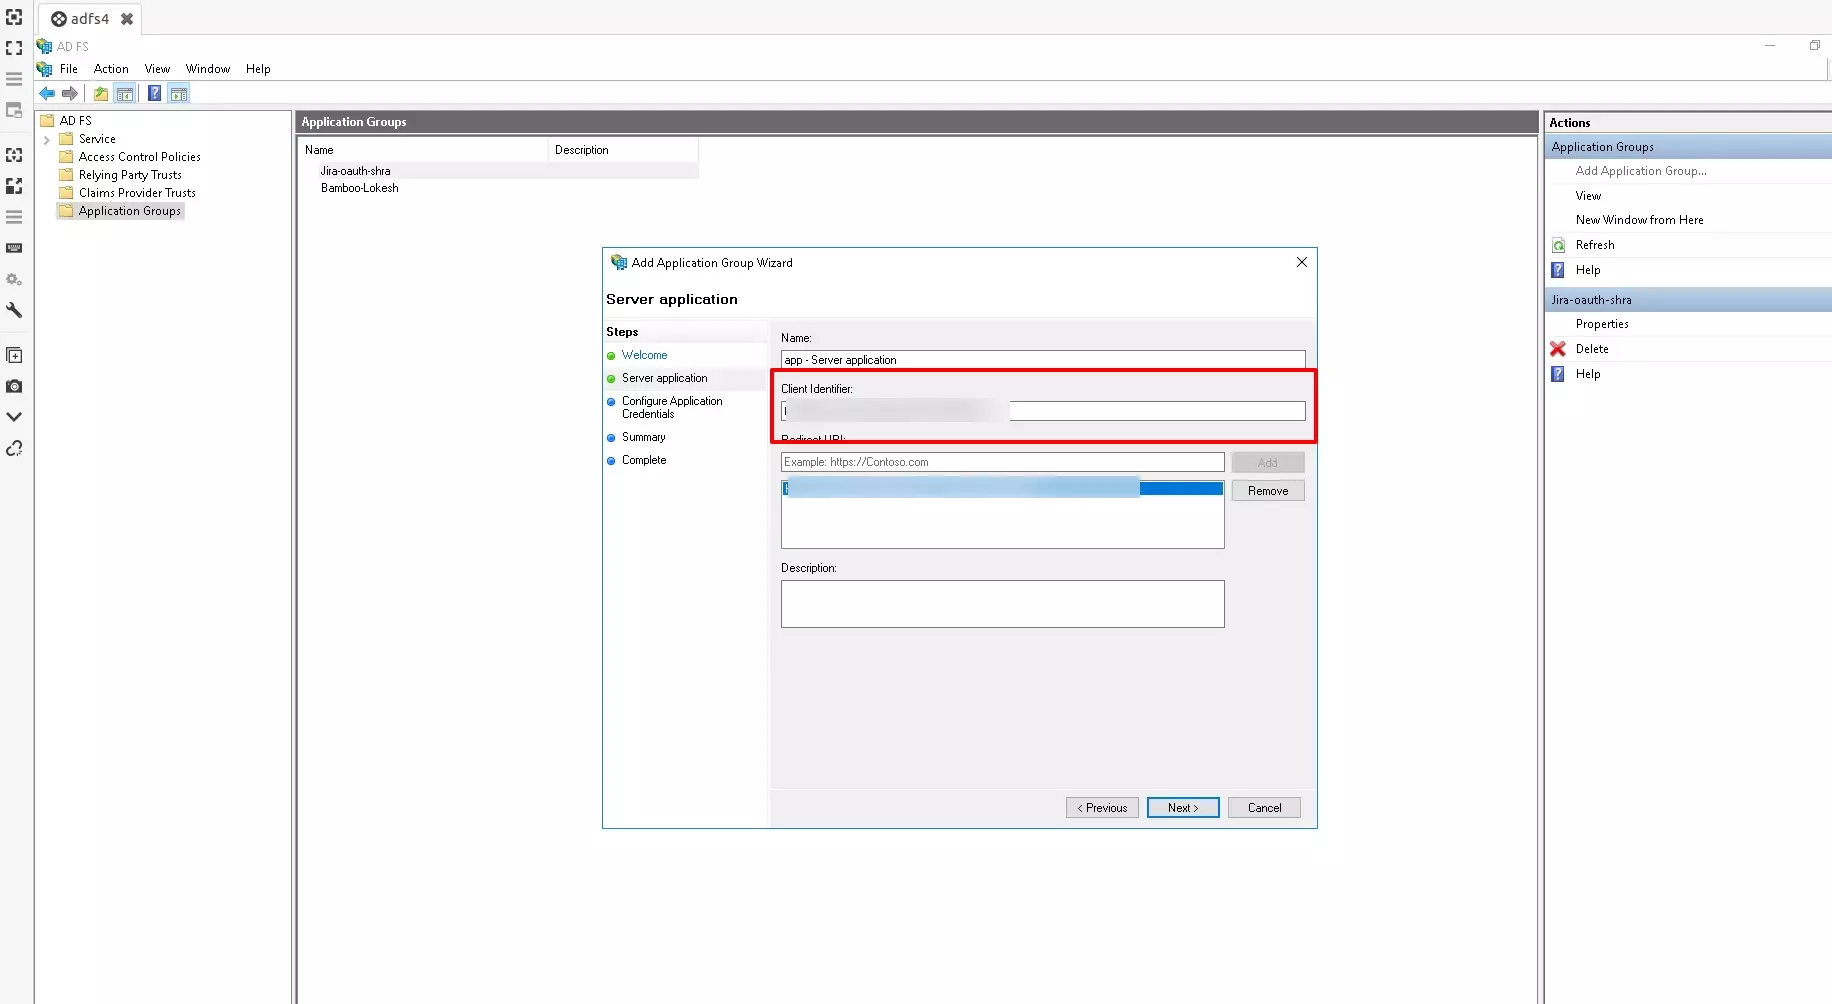 Single Sign On (SSO) using ADFS, Client Identifier